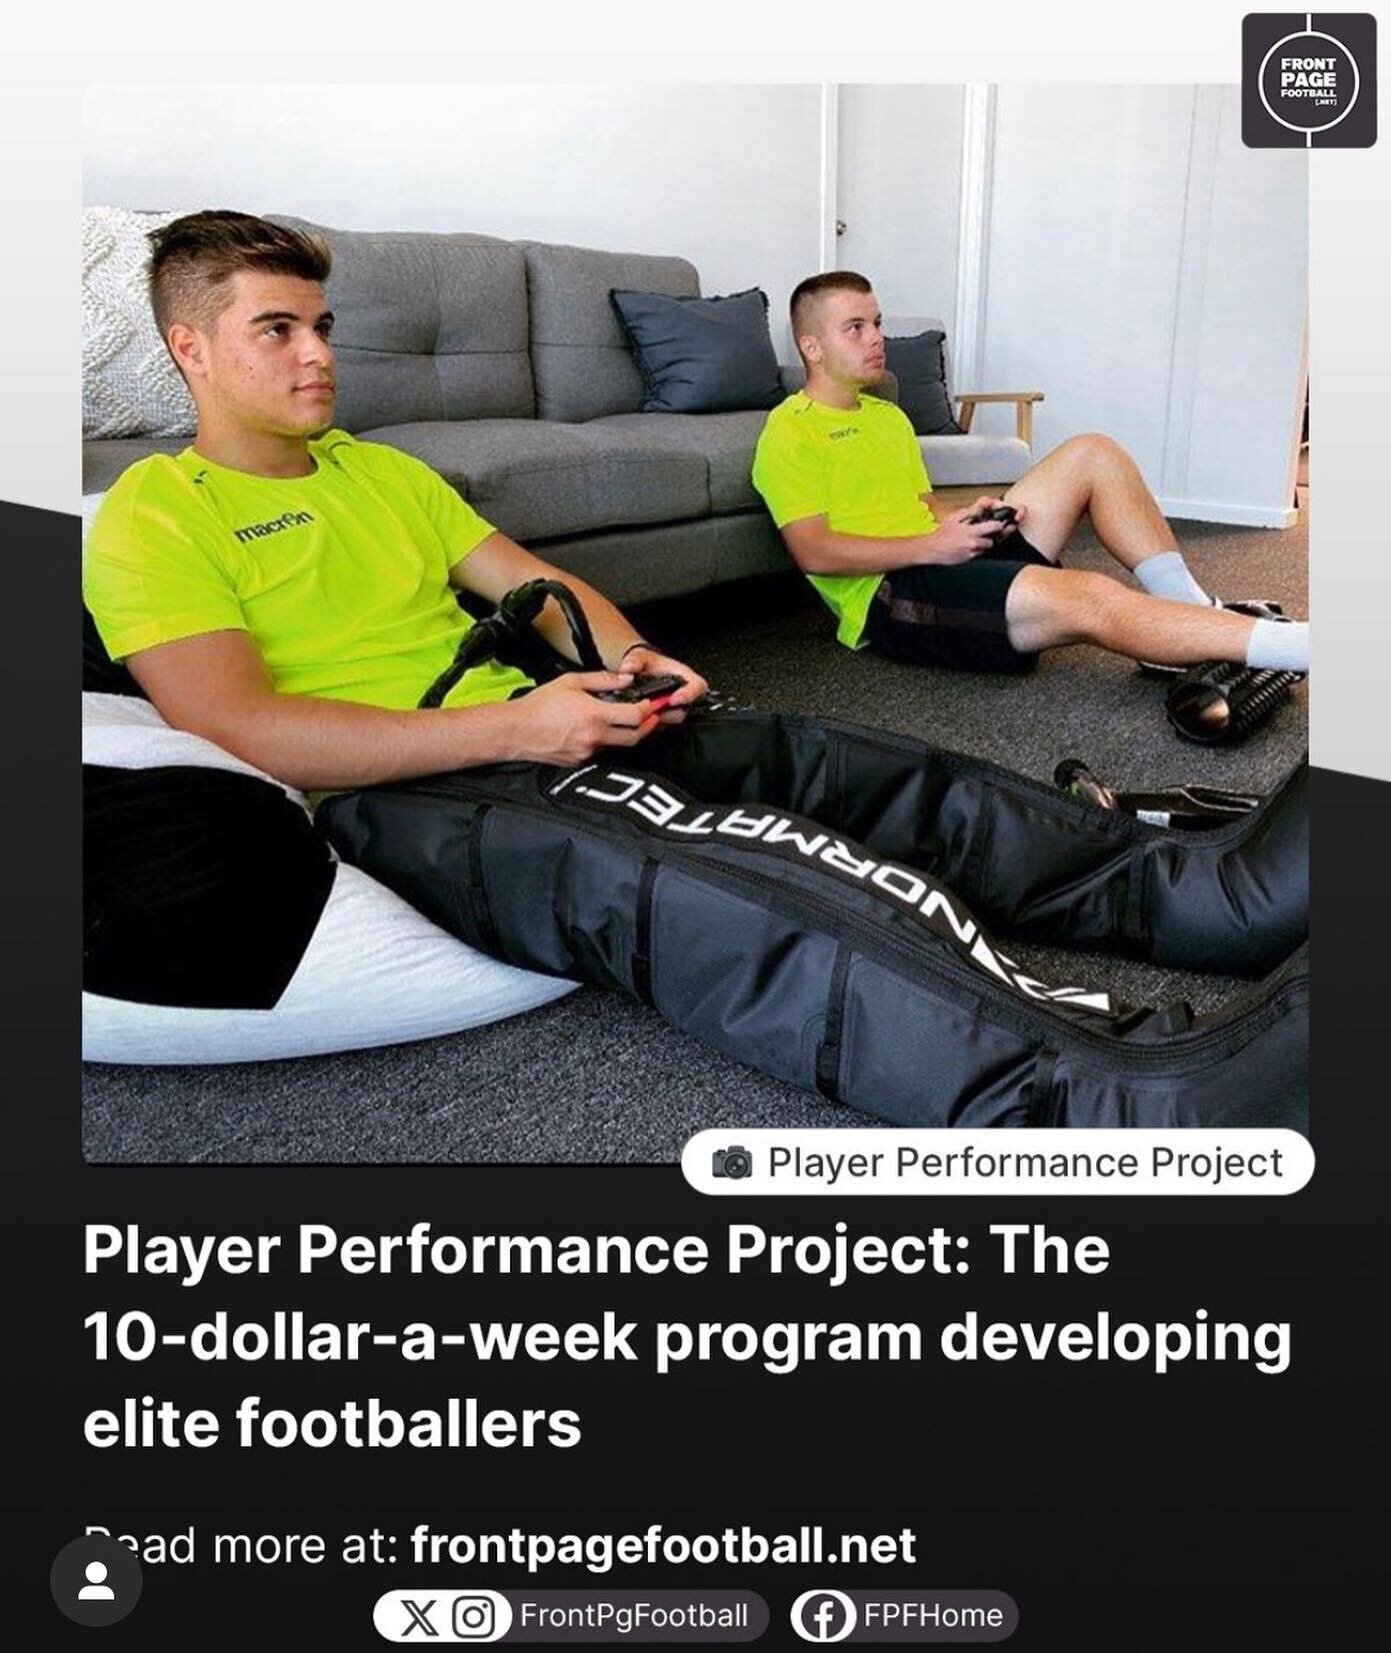 The Player Performance Project aims to create professional pathways for South Australian players who have slipped through the system.

Antonis Pagonis spoke to co-founder Josh Smith about his work in the community and how it evolved into creating an 